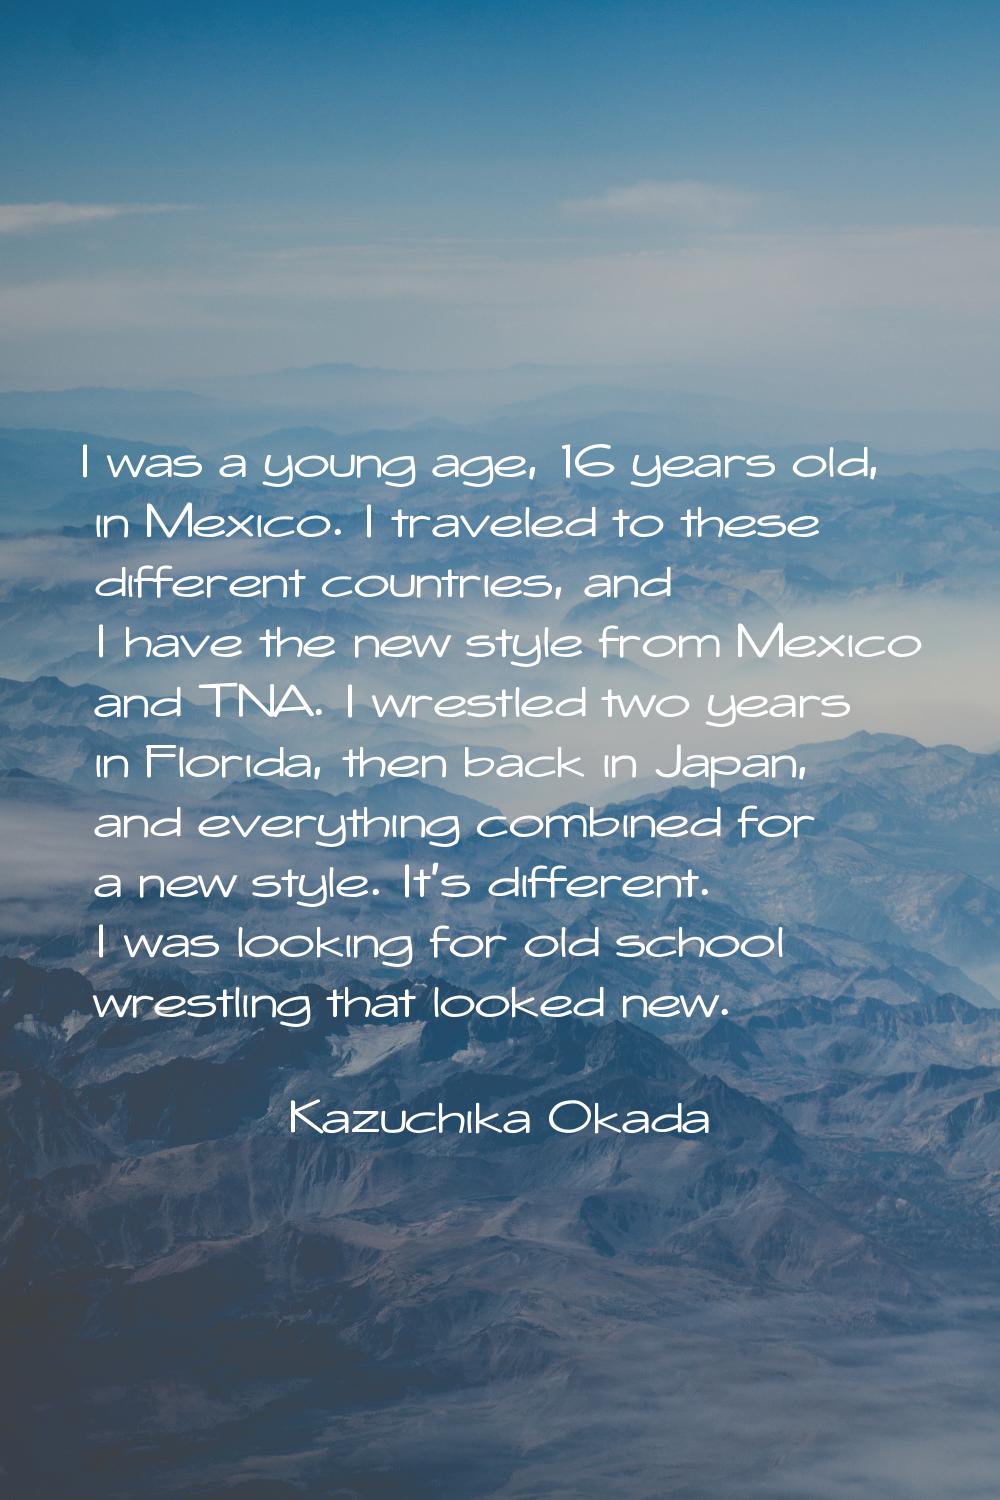 I was a young age, 16 years old, in Mexico. I traveled to these different countries, and I have the